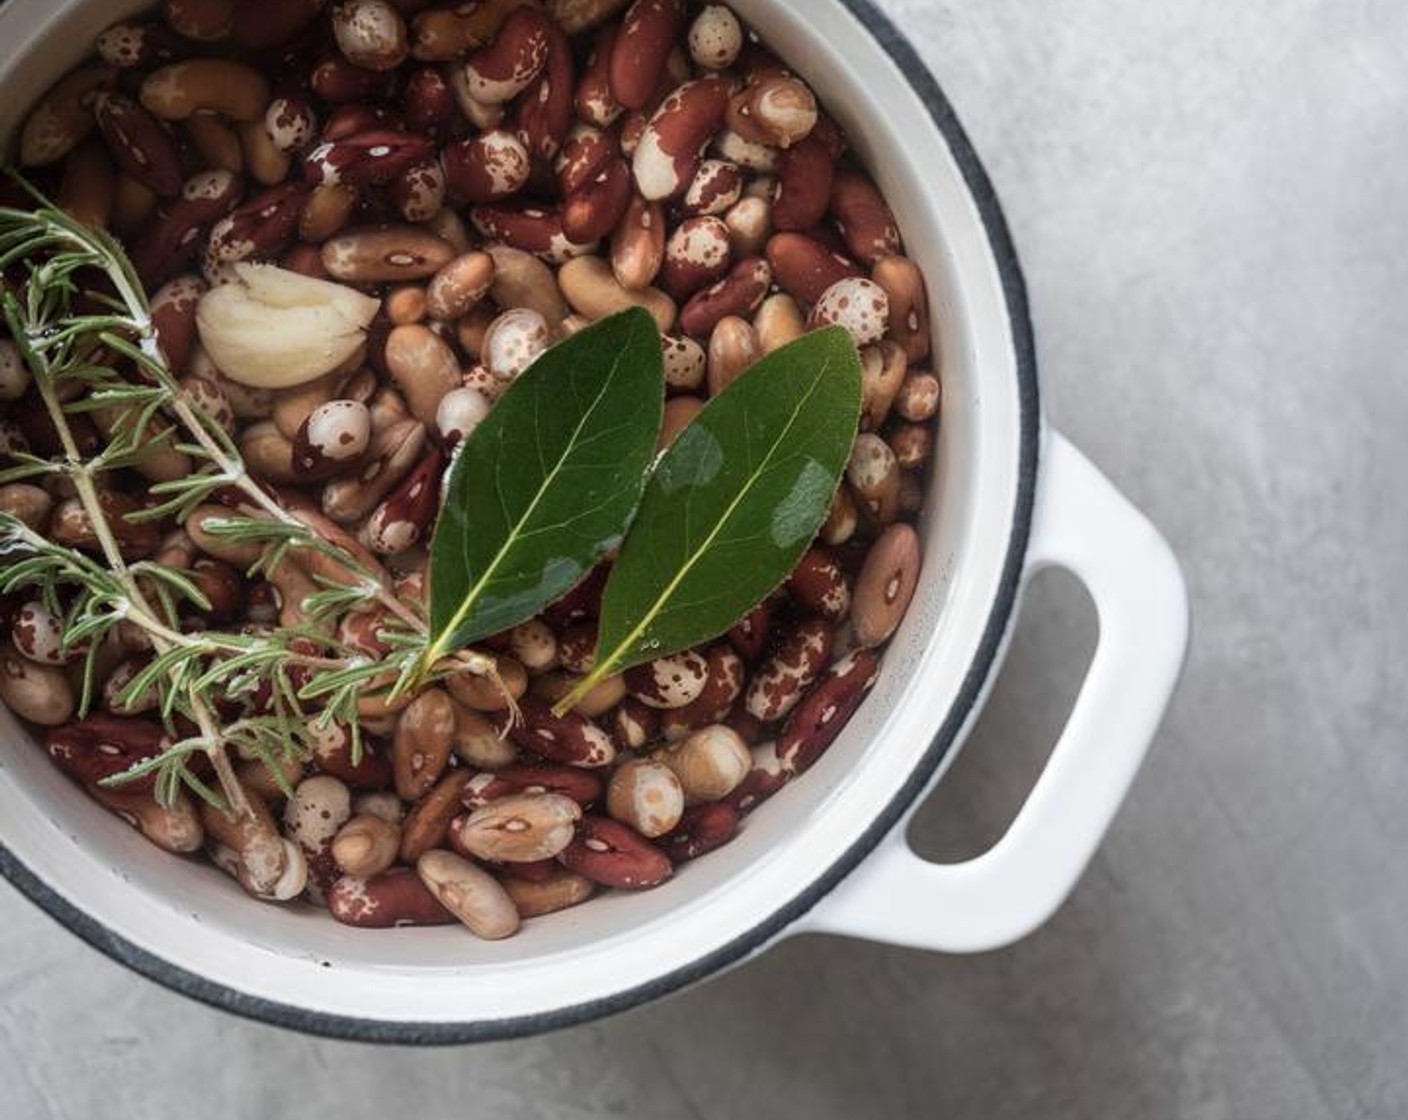 step 2 Drain soaking liquid from beans, add beans to a medium stockpot with plenty of water to cover them. Put in Salt (1 tsp), Garlic (1 clove), Bay Leaves (2 pieces), and Fresh Rosemary (2 sprigs).